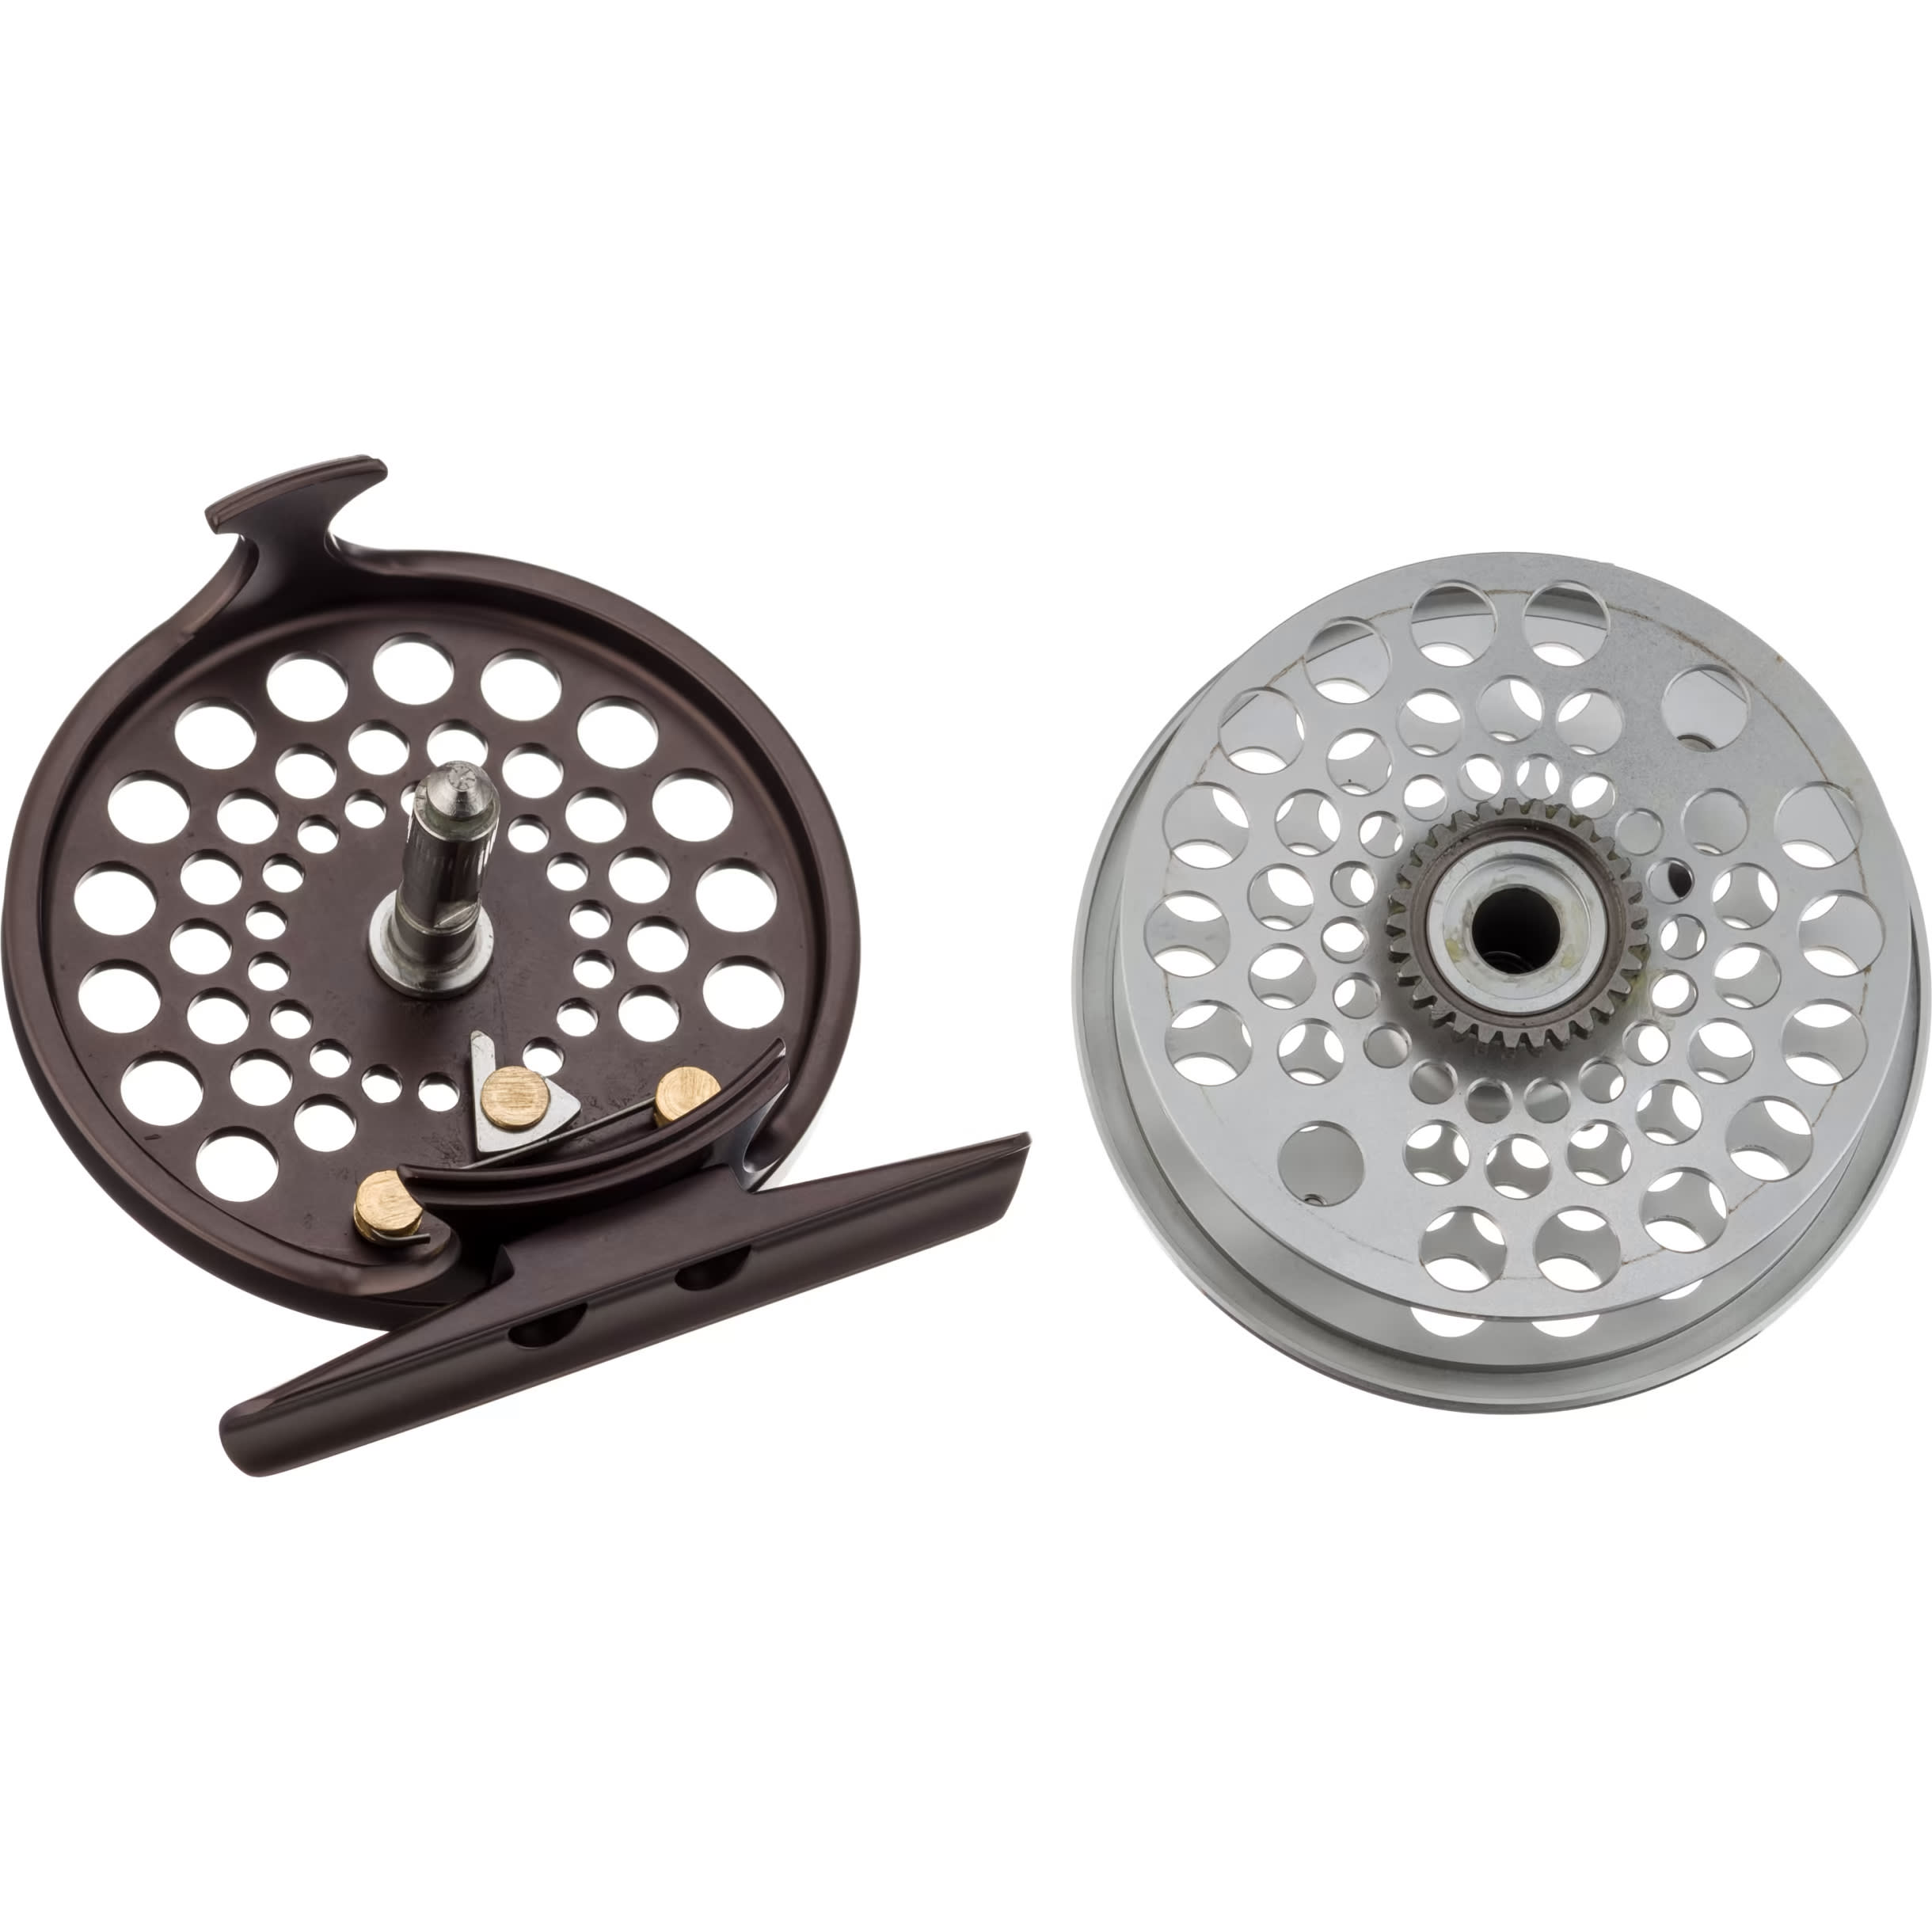 White River Fly Shop® Classic Fly Reel